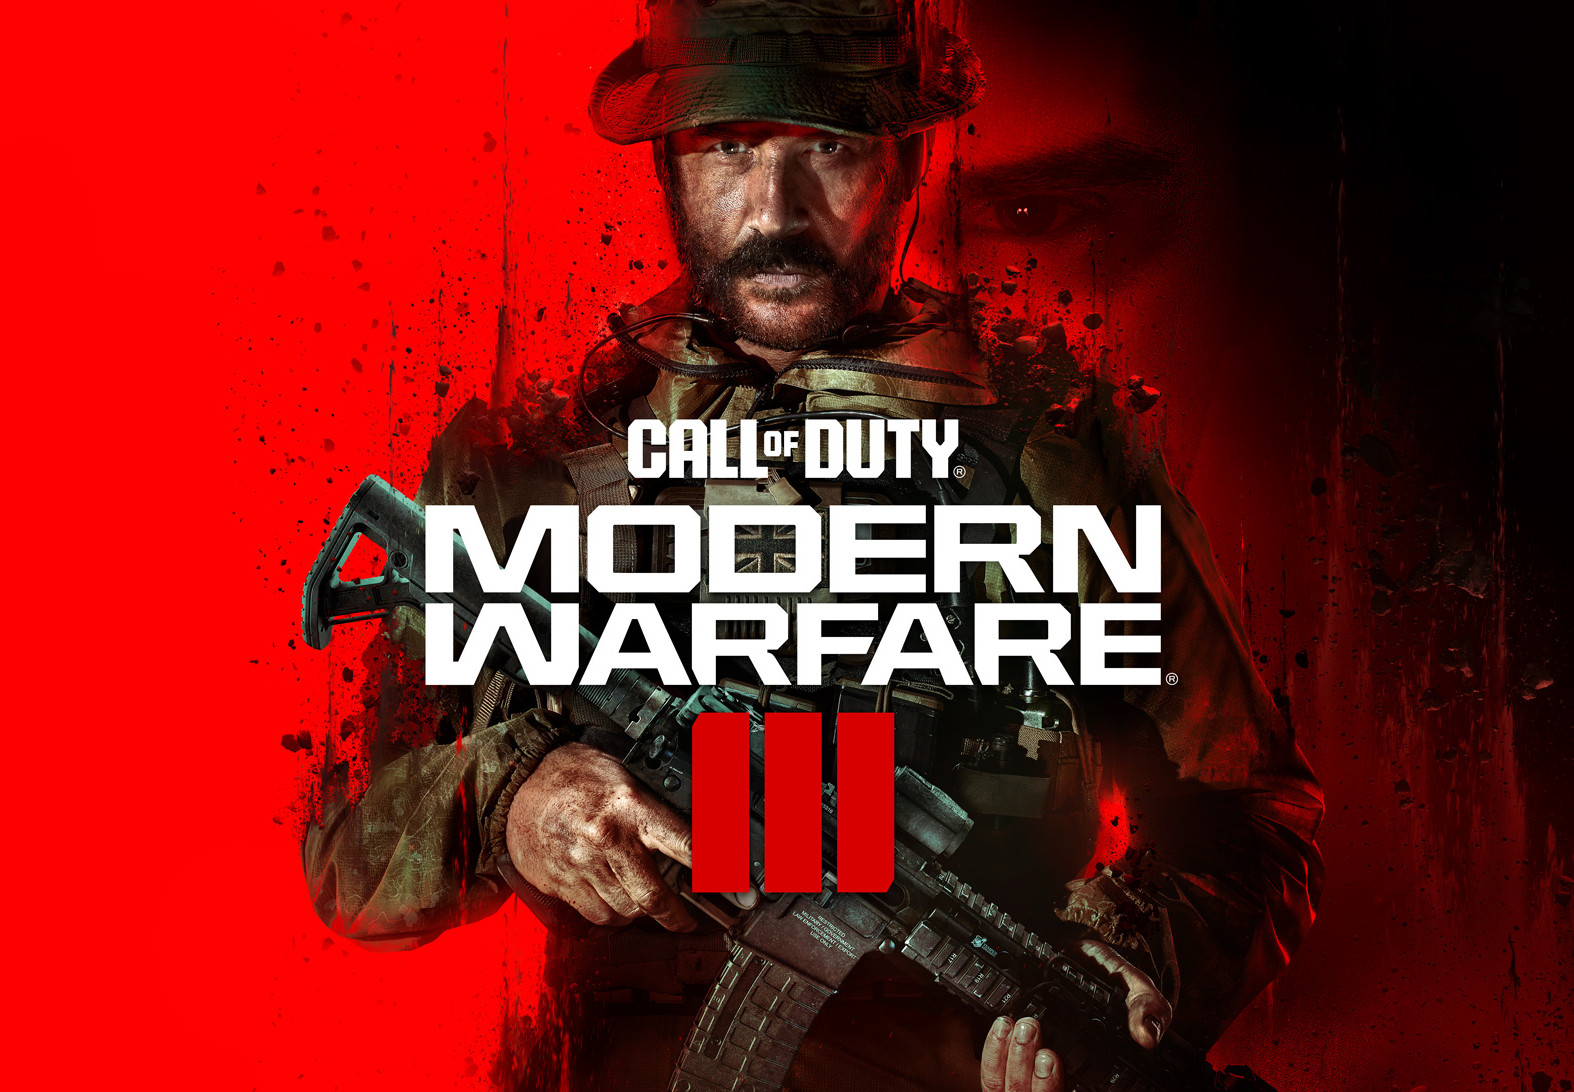 Image of Call of Duty: Modern Warfare III PlayStation 4 Account pixelpuffinnet Activation Link TR